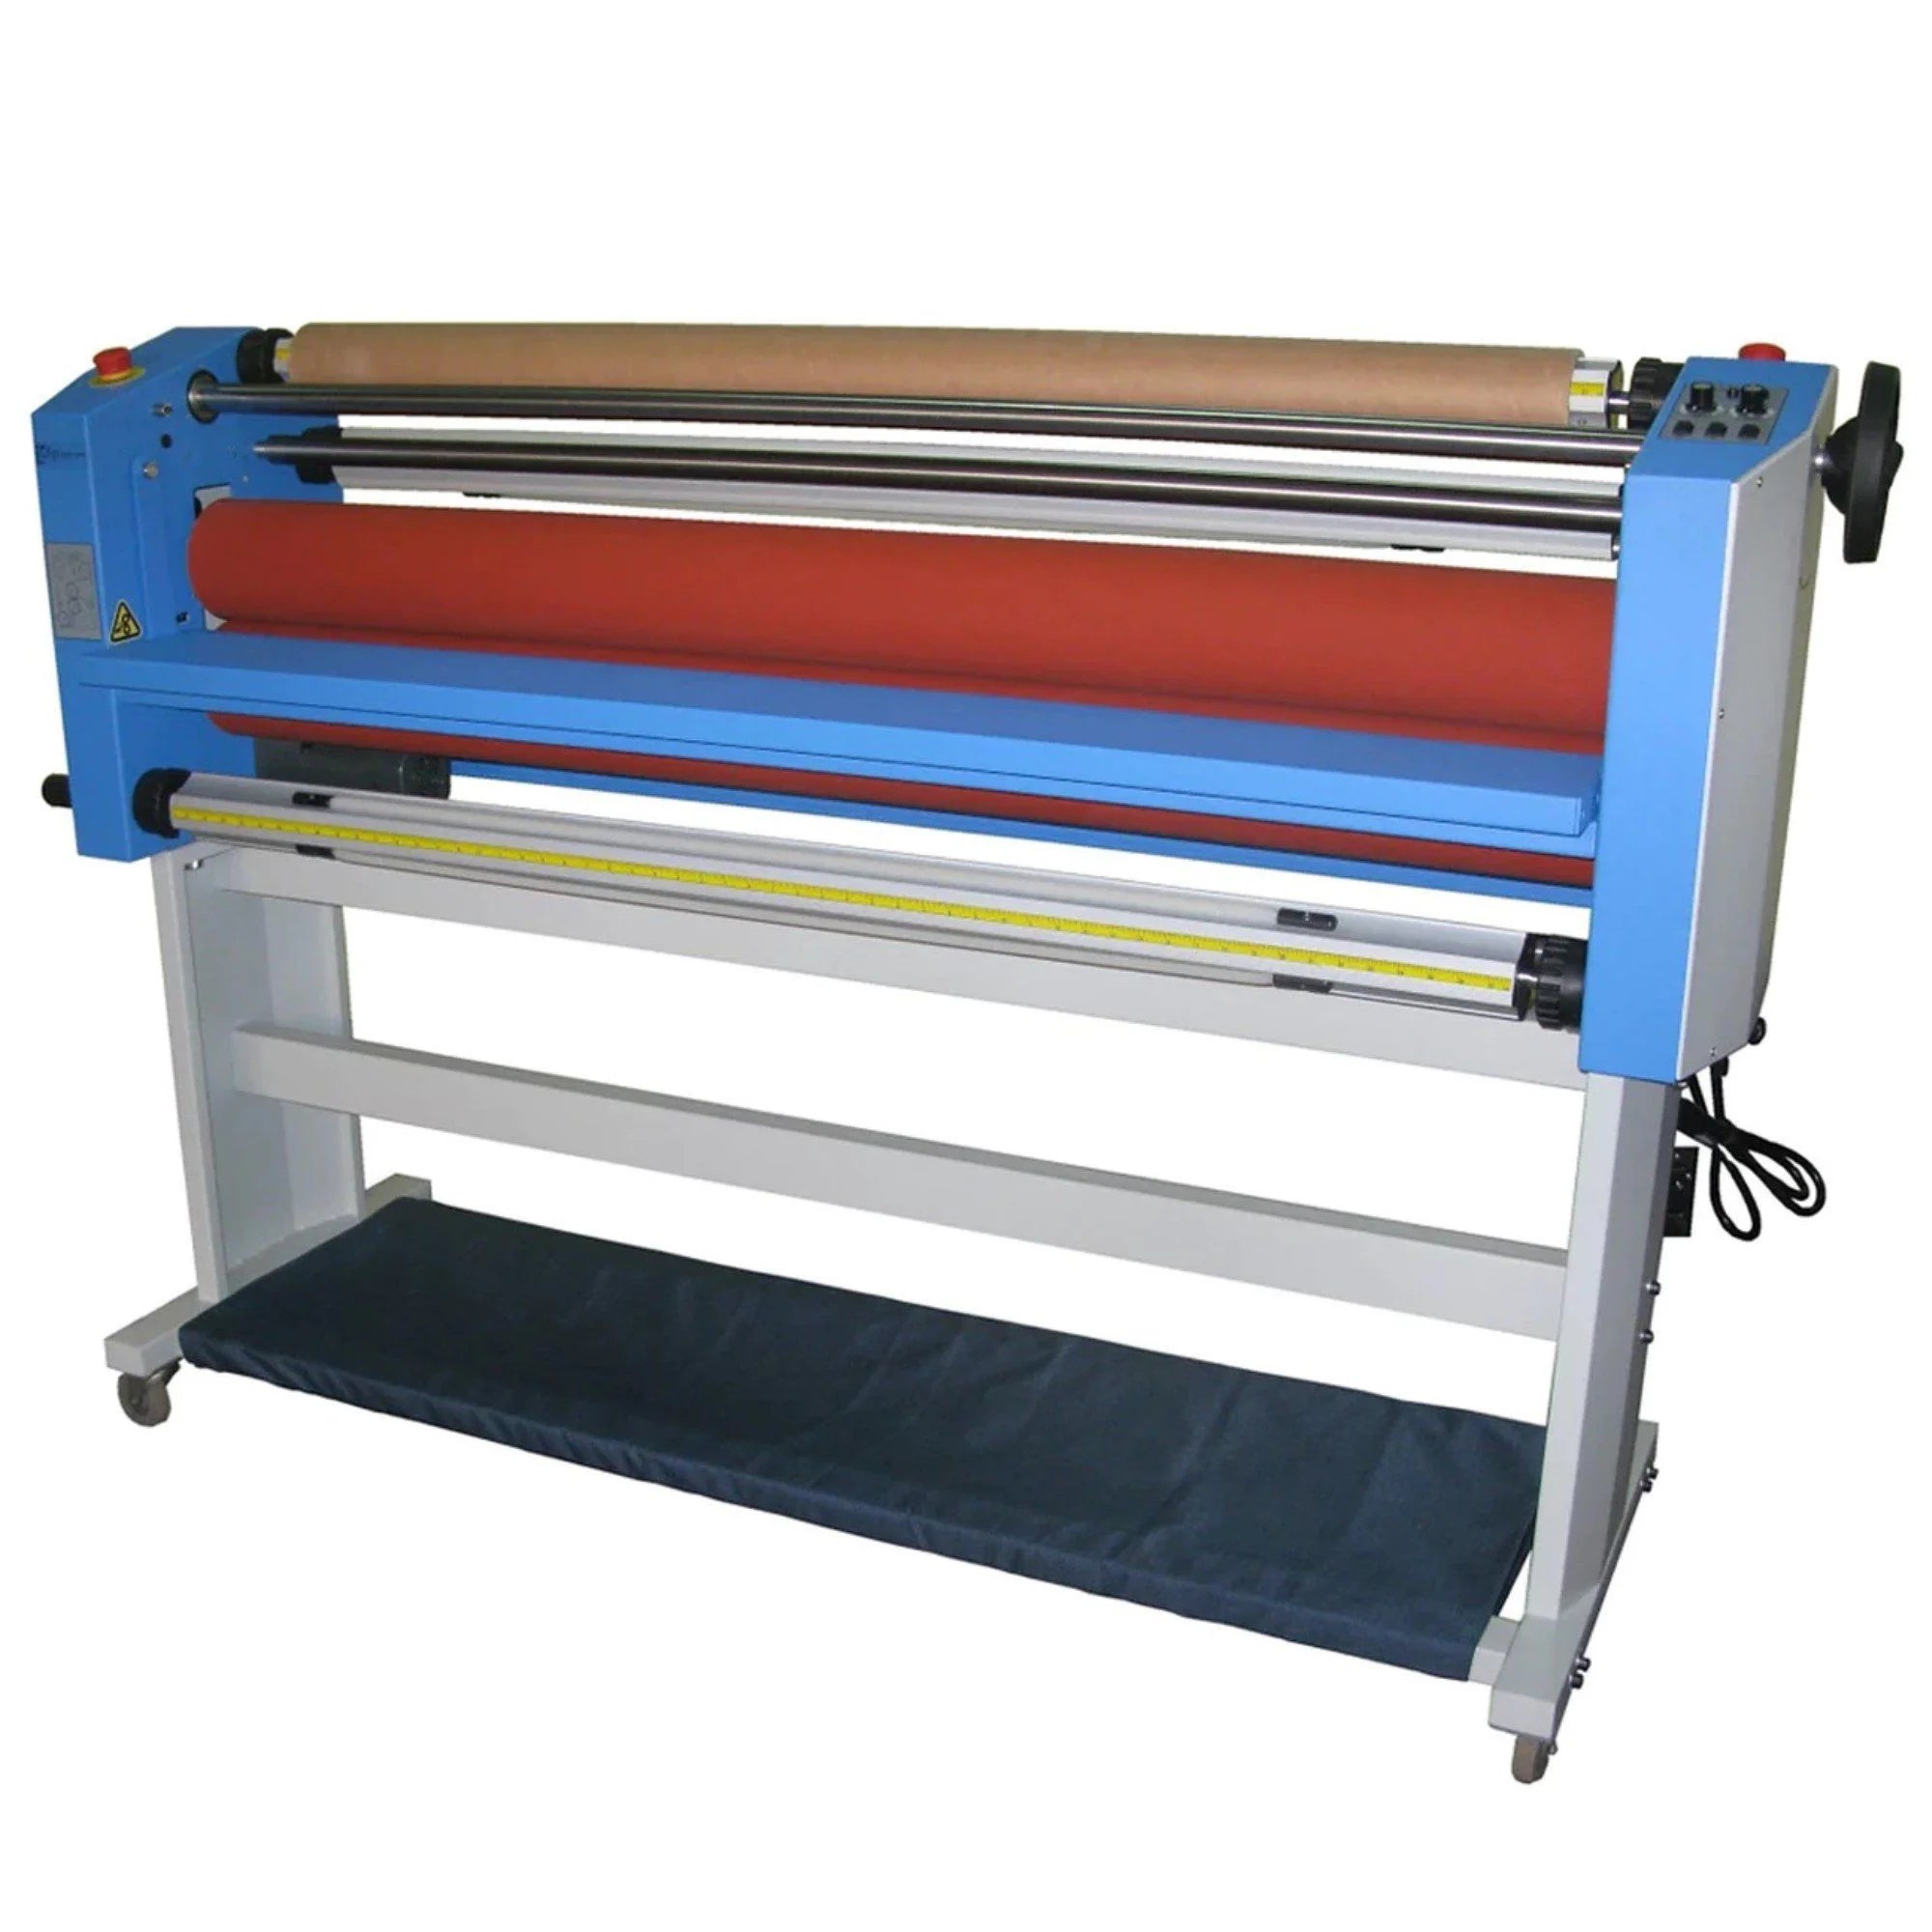  "GFP-363TH Top Heat Wide Format Roll Laminator with Stand - 63" Eco Printers - GFP" - A versatile top heat wide format roll laminator with a stand, expertly designed for 63" eco printers by GFP.